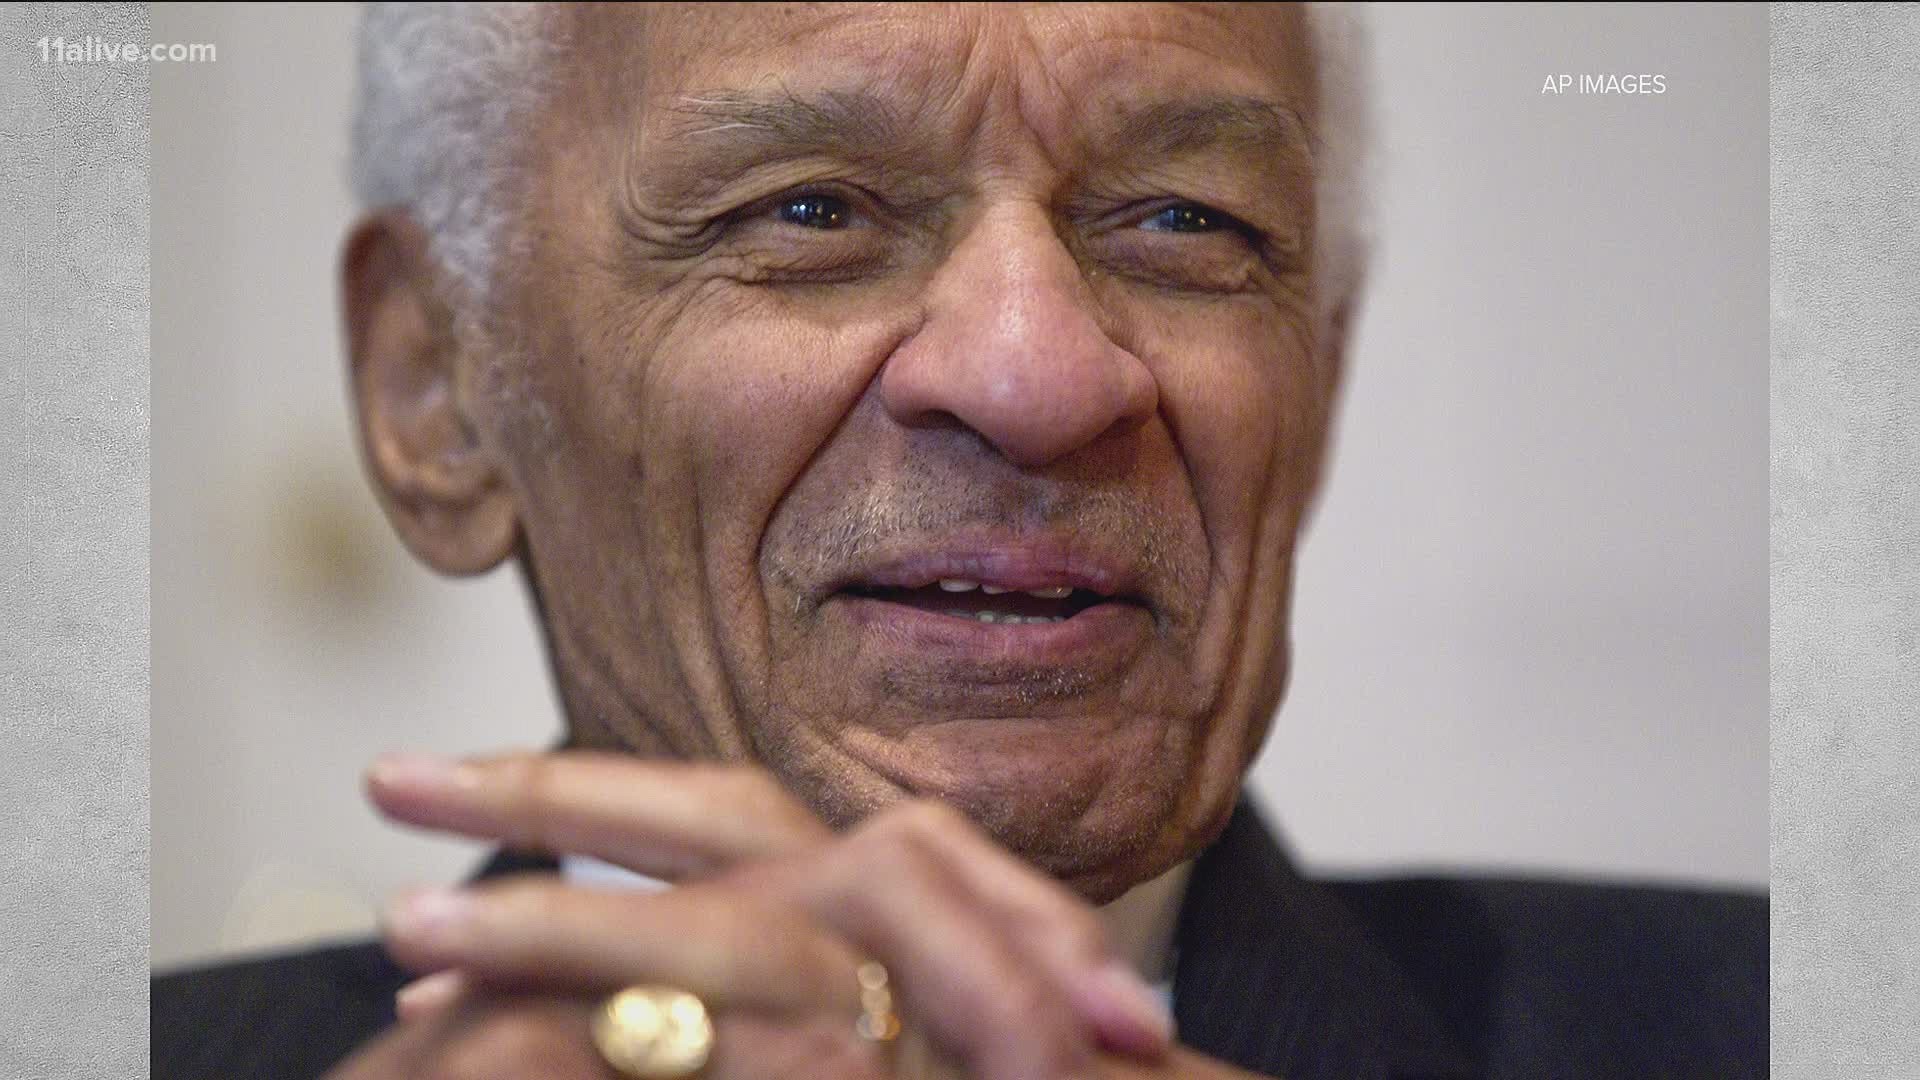 11Alive Anchor Jeff Hullinger remembers the Civil Rights icon, who died Friday at 95.